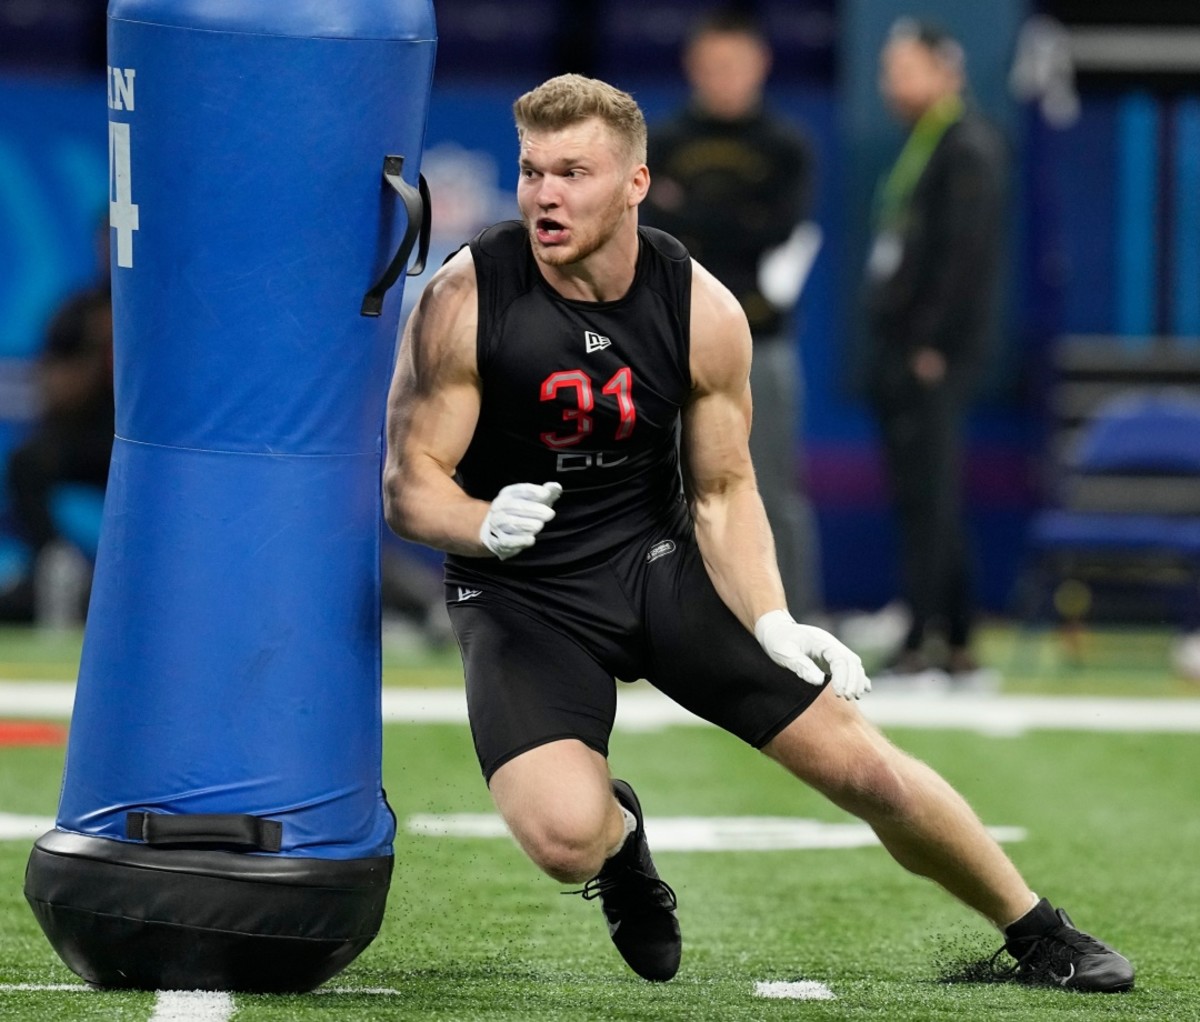 NFL Draft 2022: Michigan defensive lineman Aidan Hutchinson runs around a blue cylindrical barrier during the NFL football scouting combine.